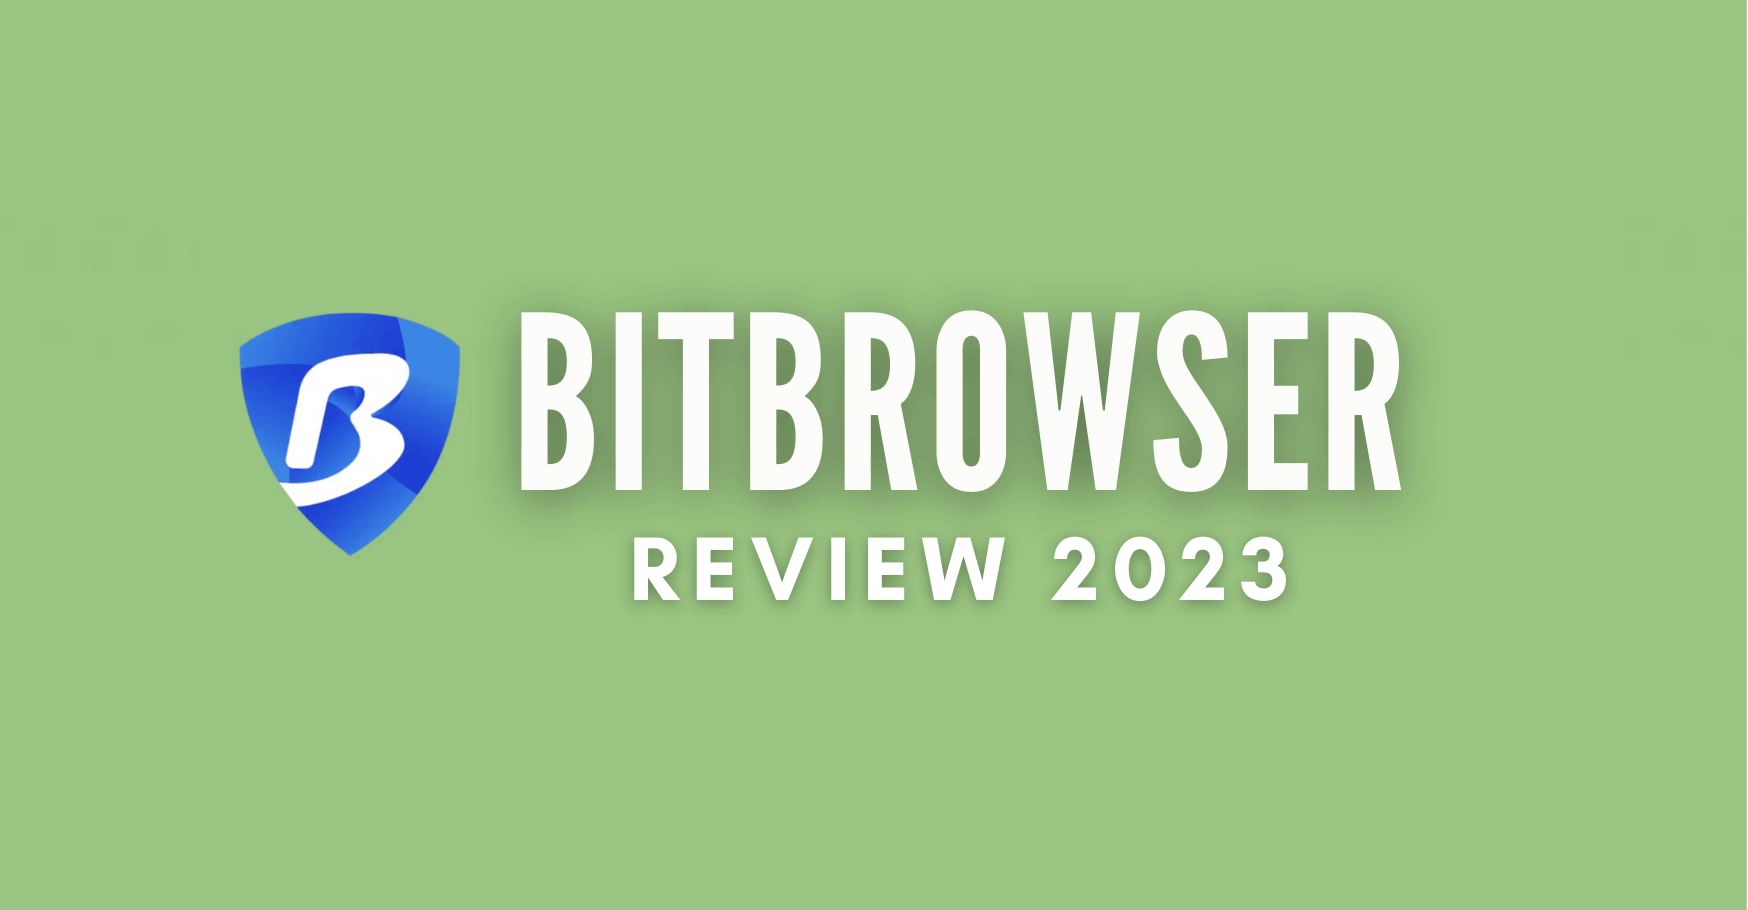 BitBrowser featured image.